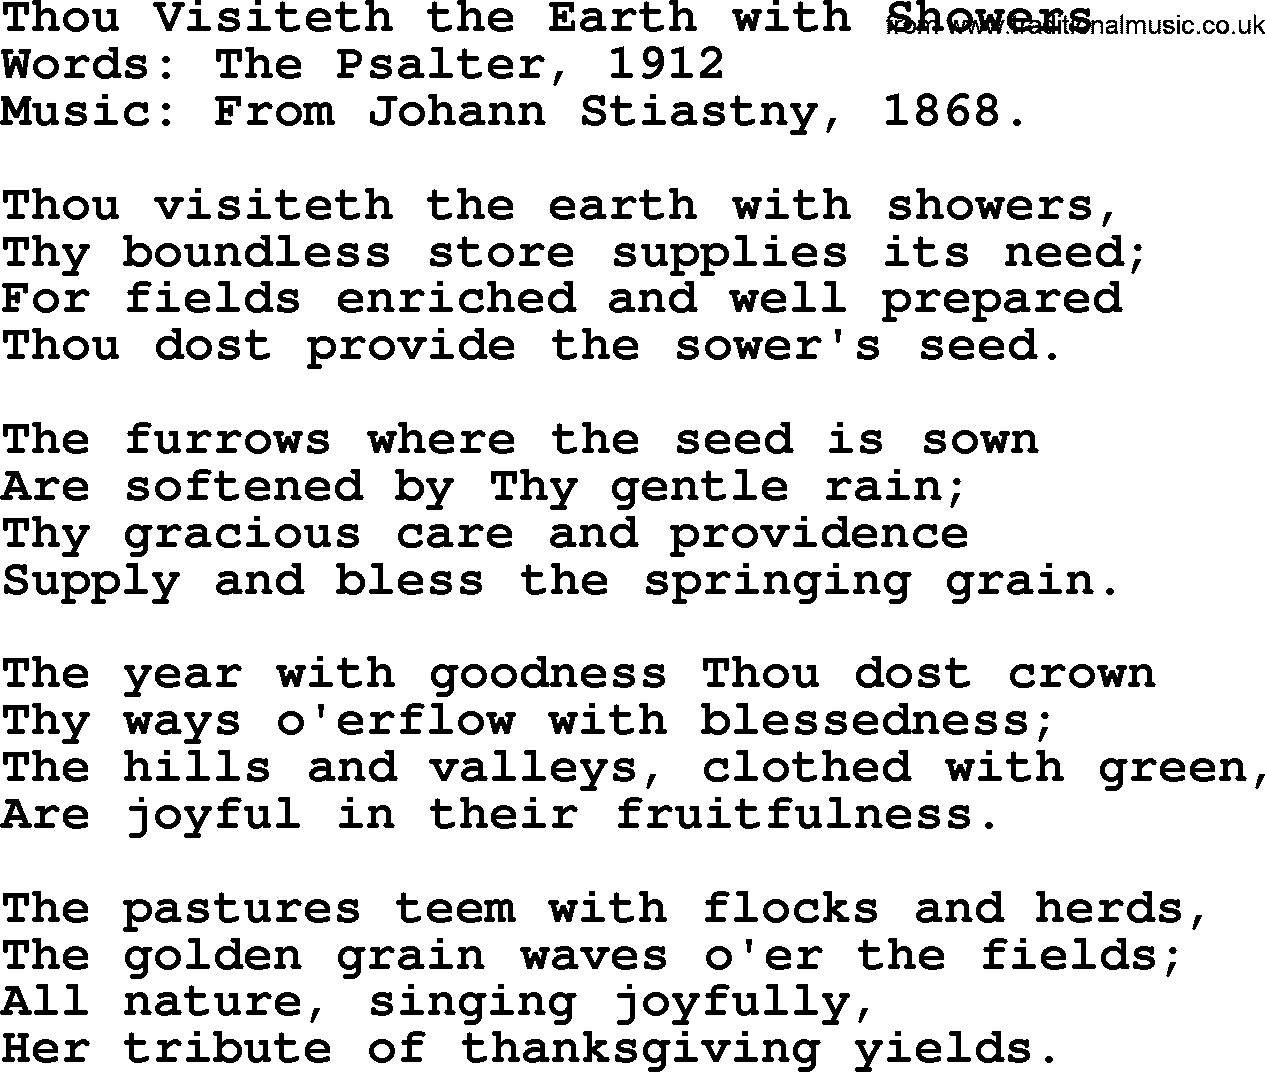 Thanksgiving Hymns and Songs: Thou Visiteth The Earth With Showers lyrics with PDF